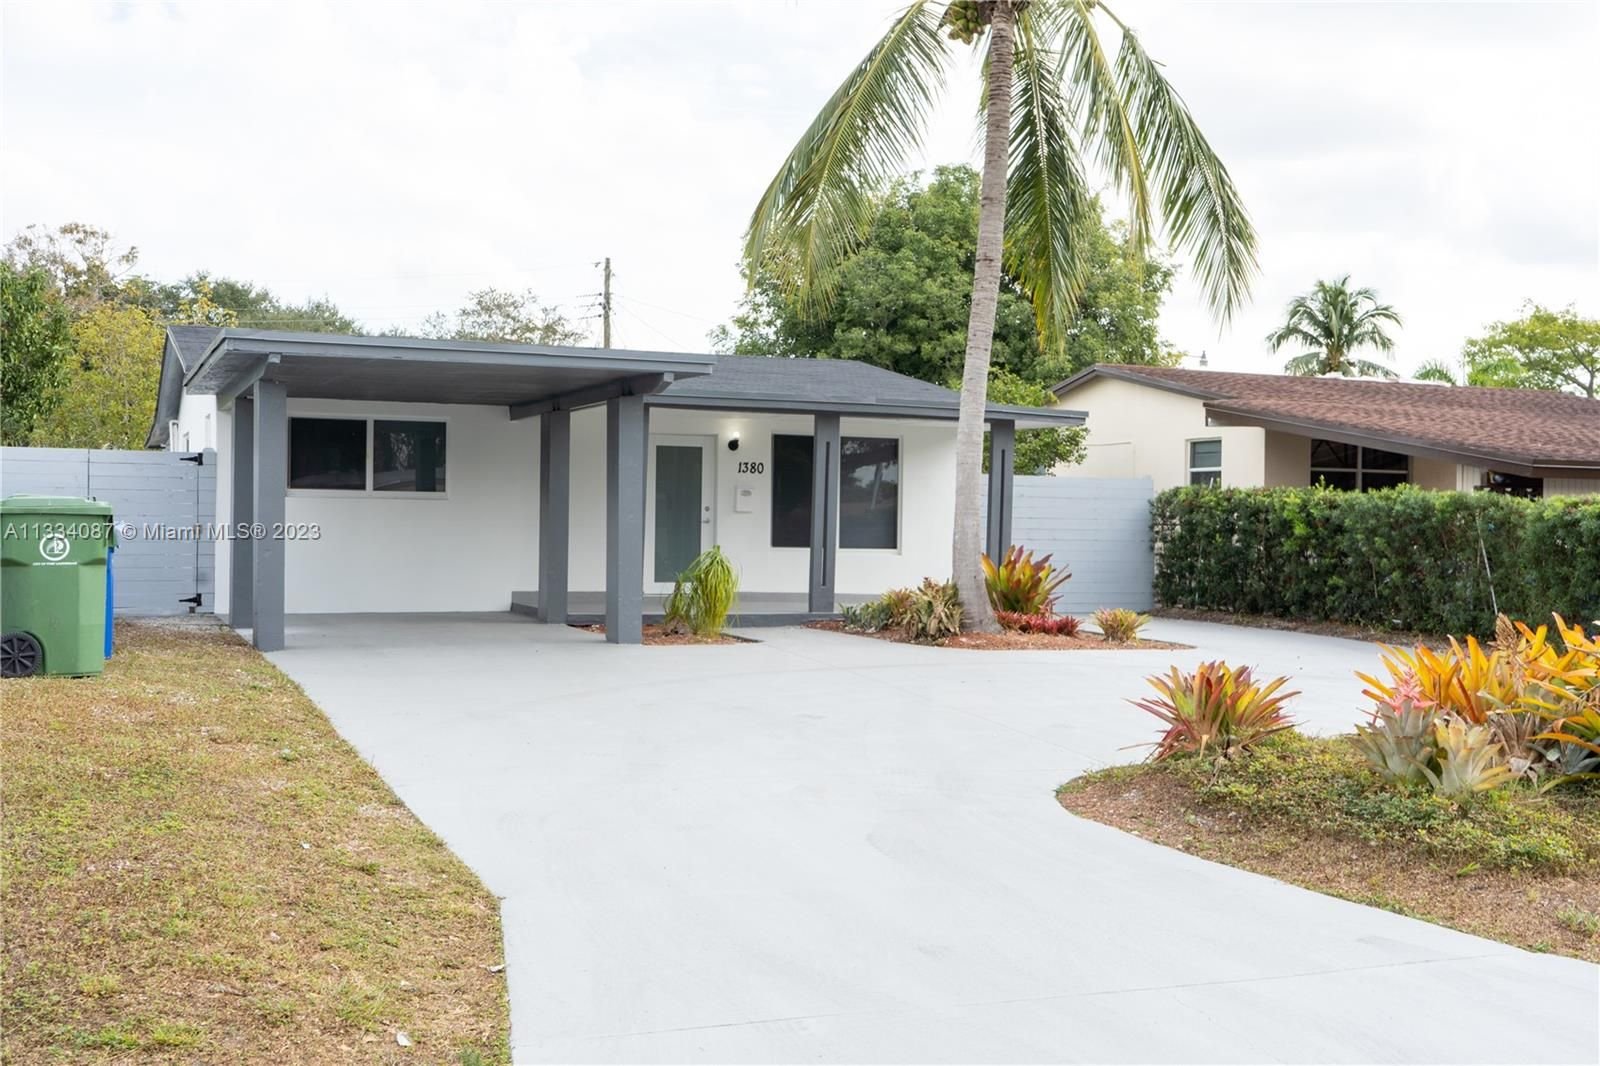 Real estate property located at 1380 34th Ave, Broward County, Fort Lauderdale, FL